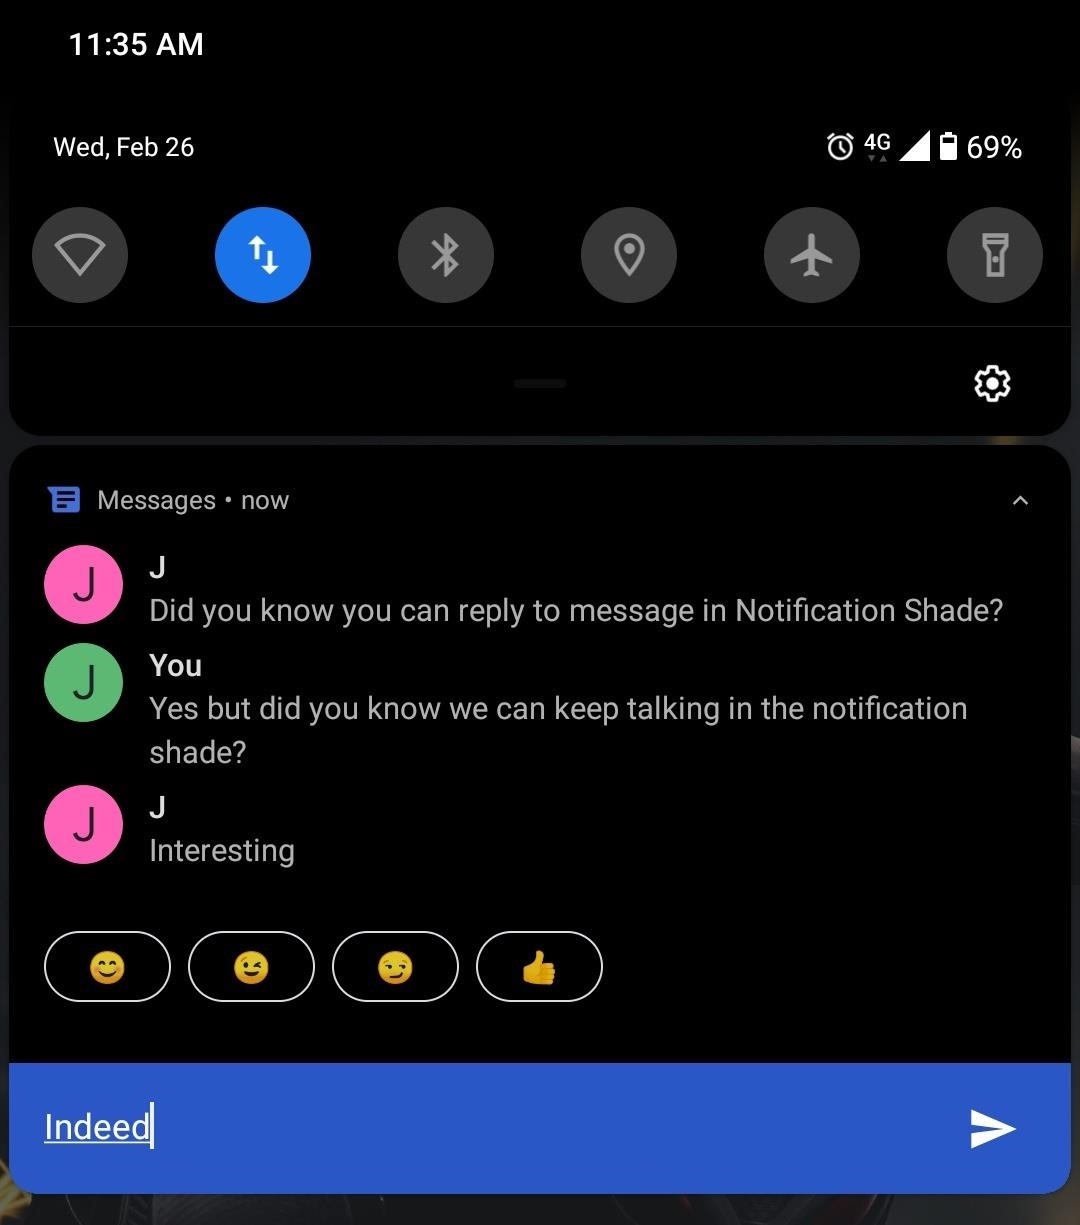 androids-quick-reply-can-turn-your-notification-tray-into-chat-window.w1456.jpg